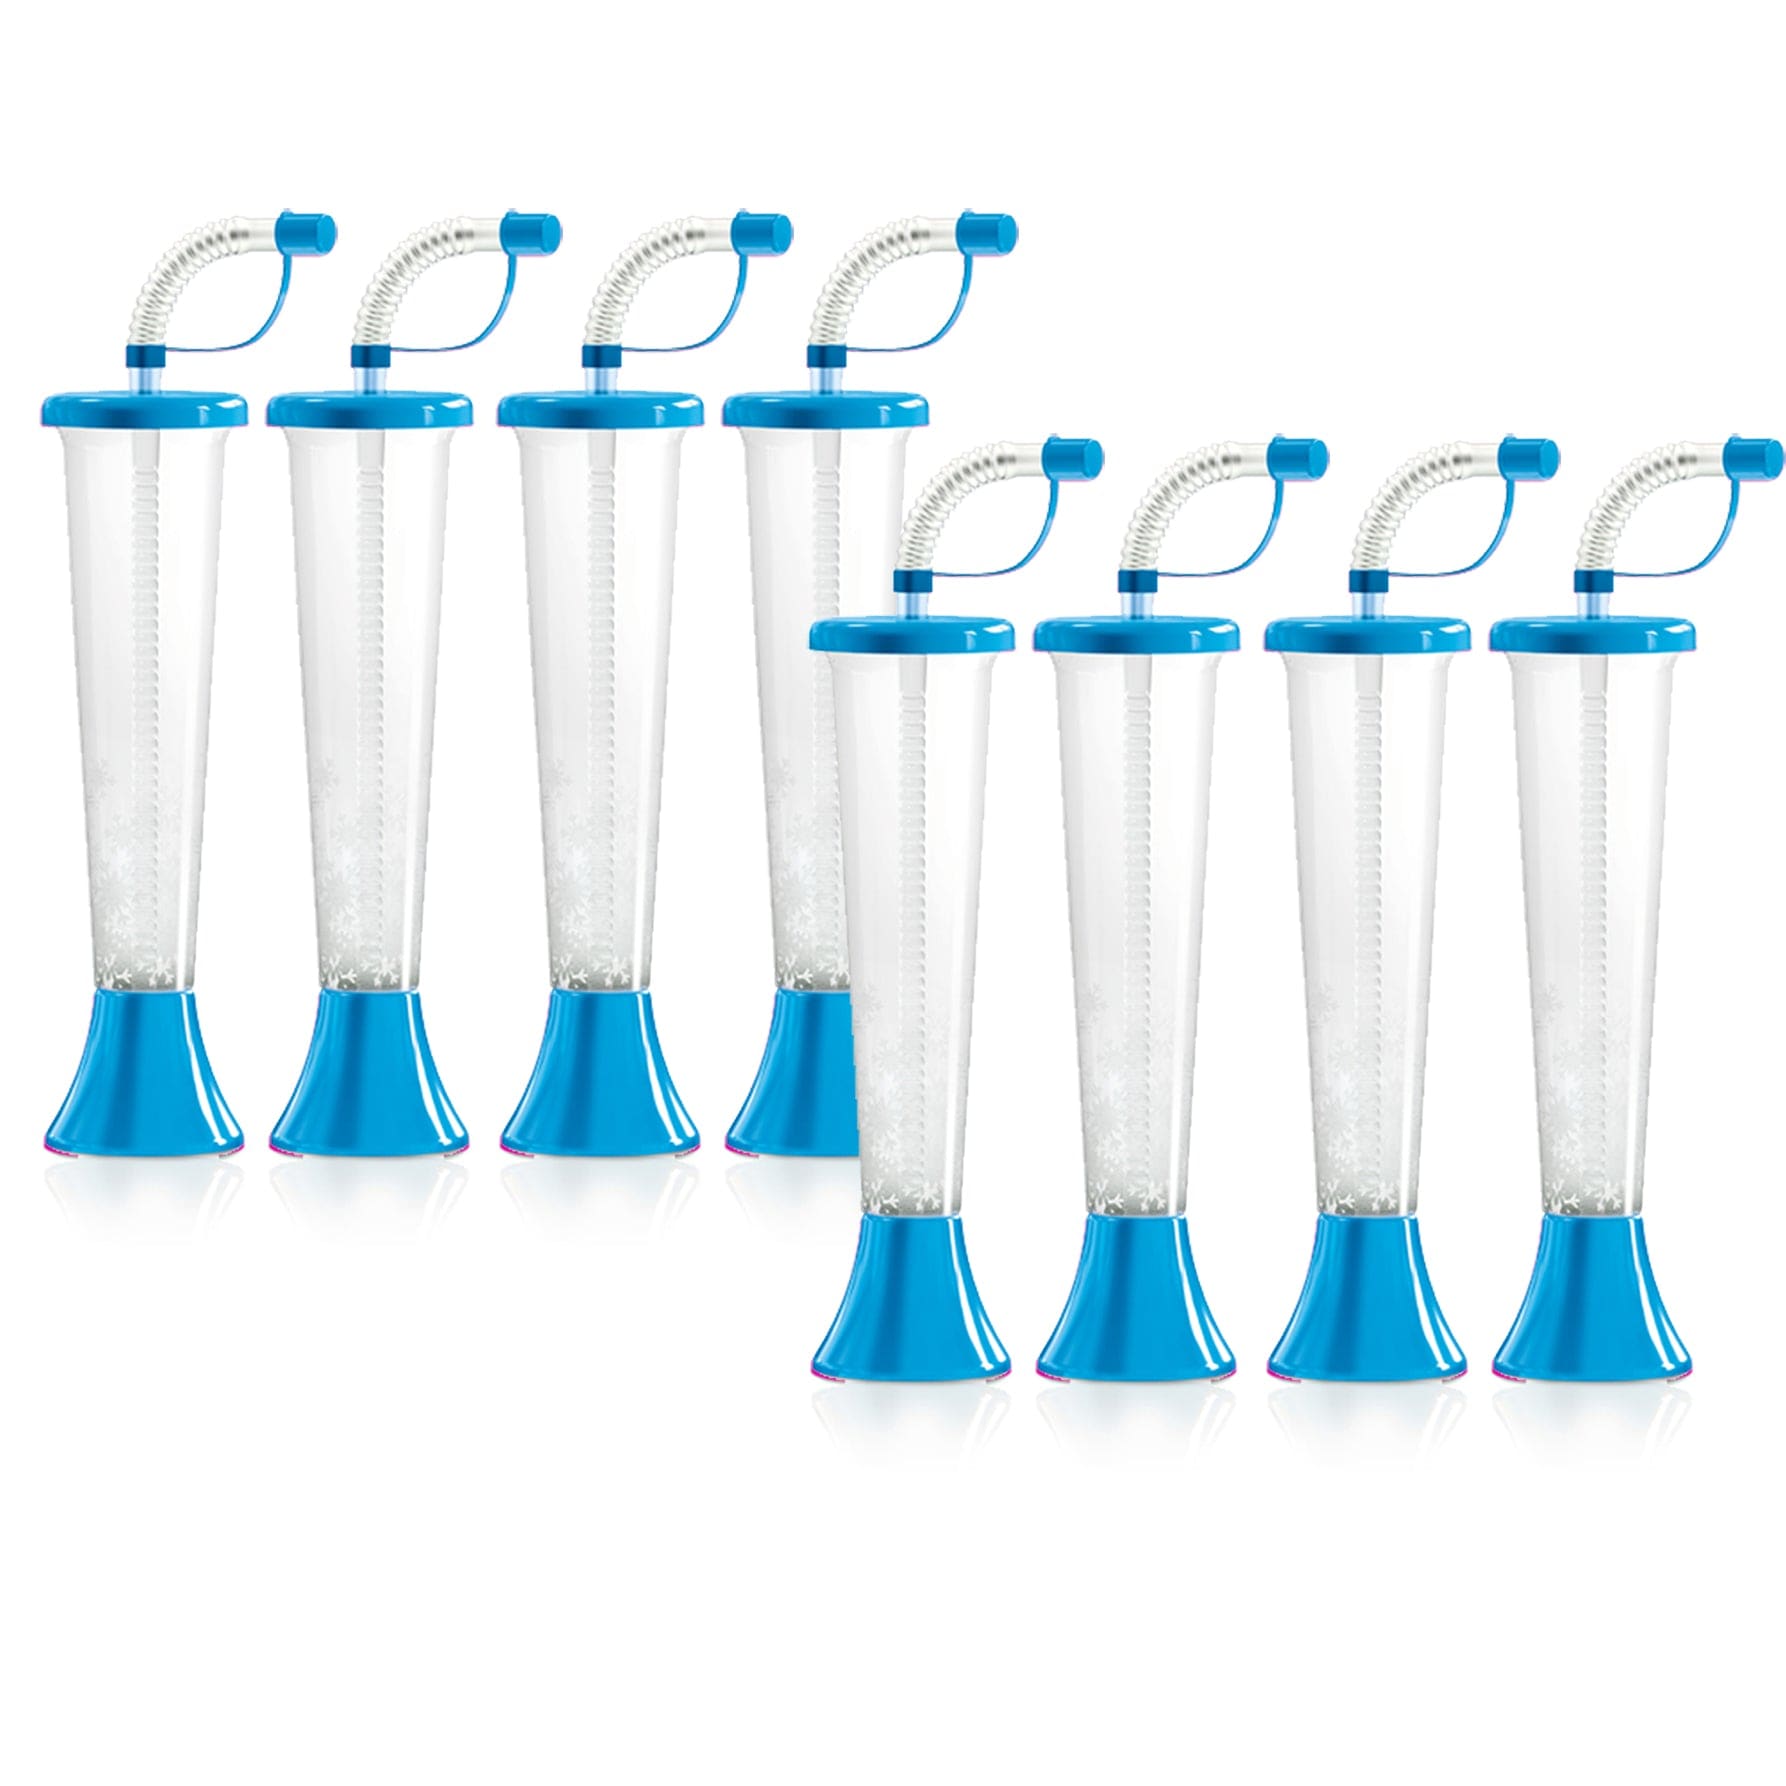 Yard Cups for Kids (108 Cups - Blue Lids) - for Cold and Frozen Drinks Kids Parties - 9oz/250ml